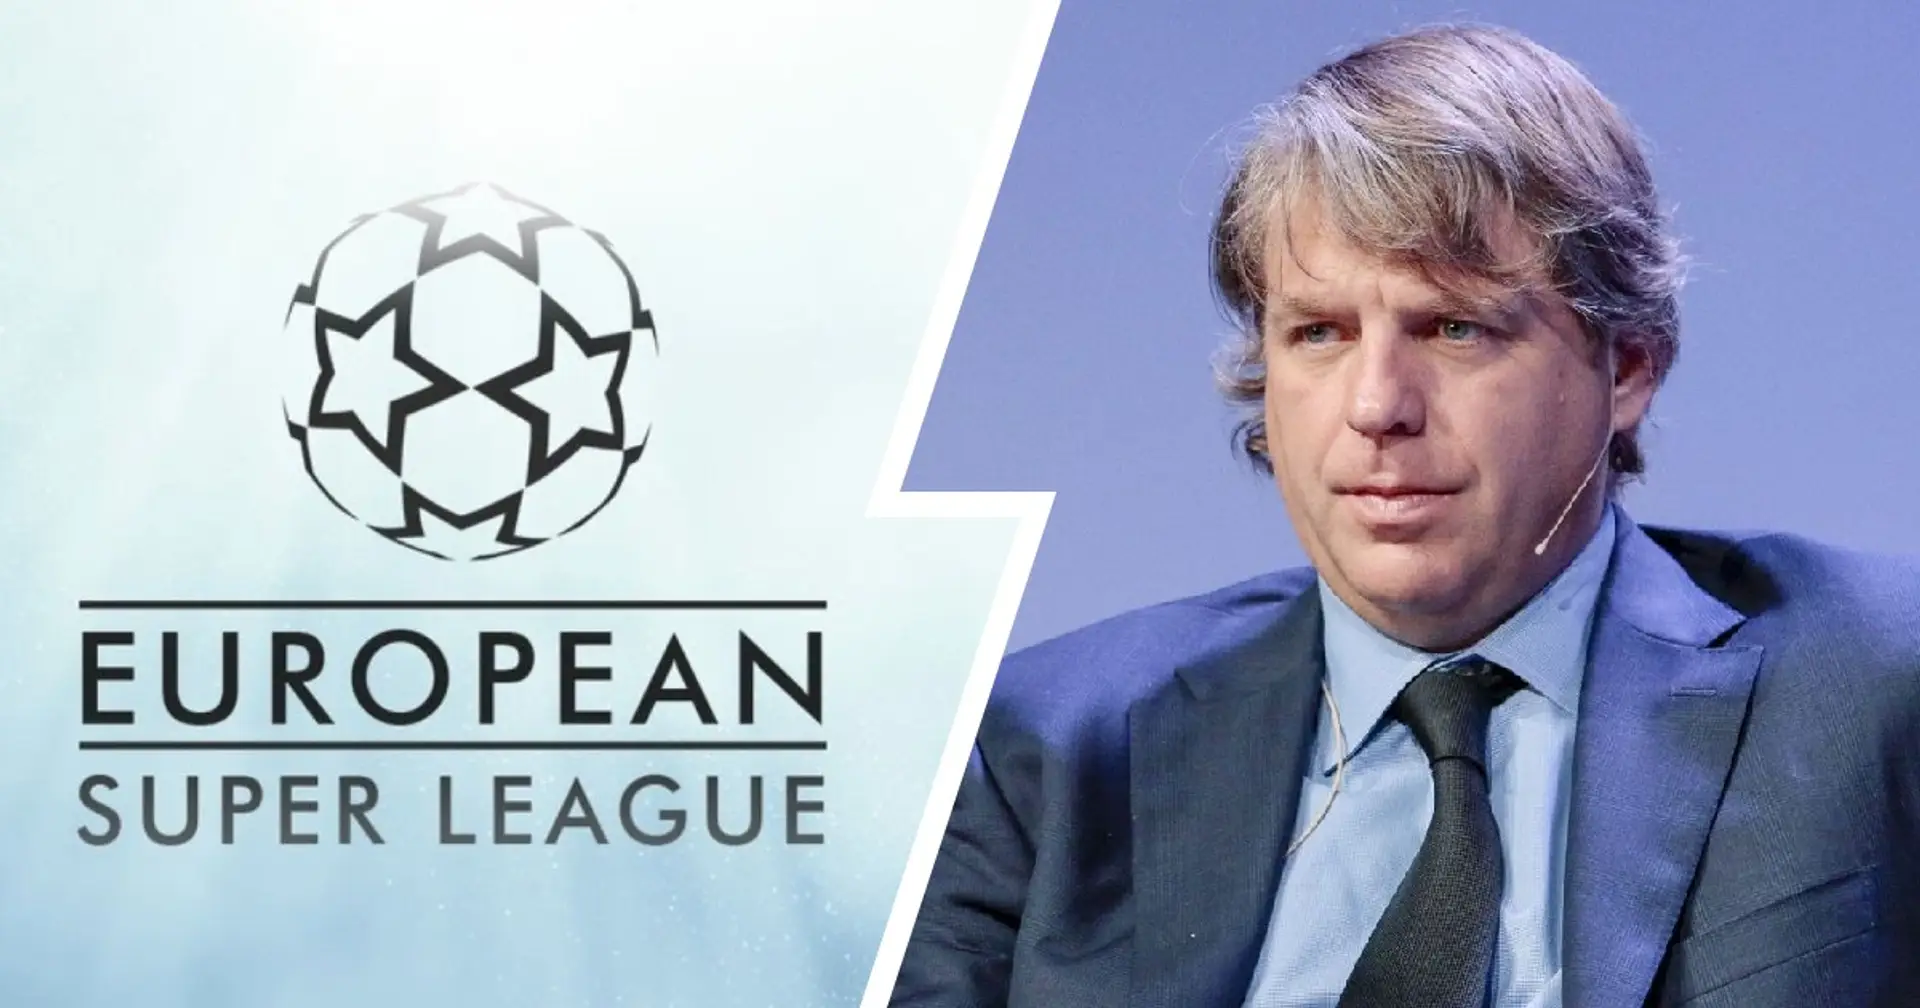 New European Super League announced, aimed to replace Champions League - explained